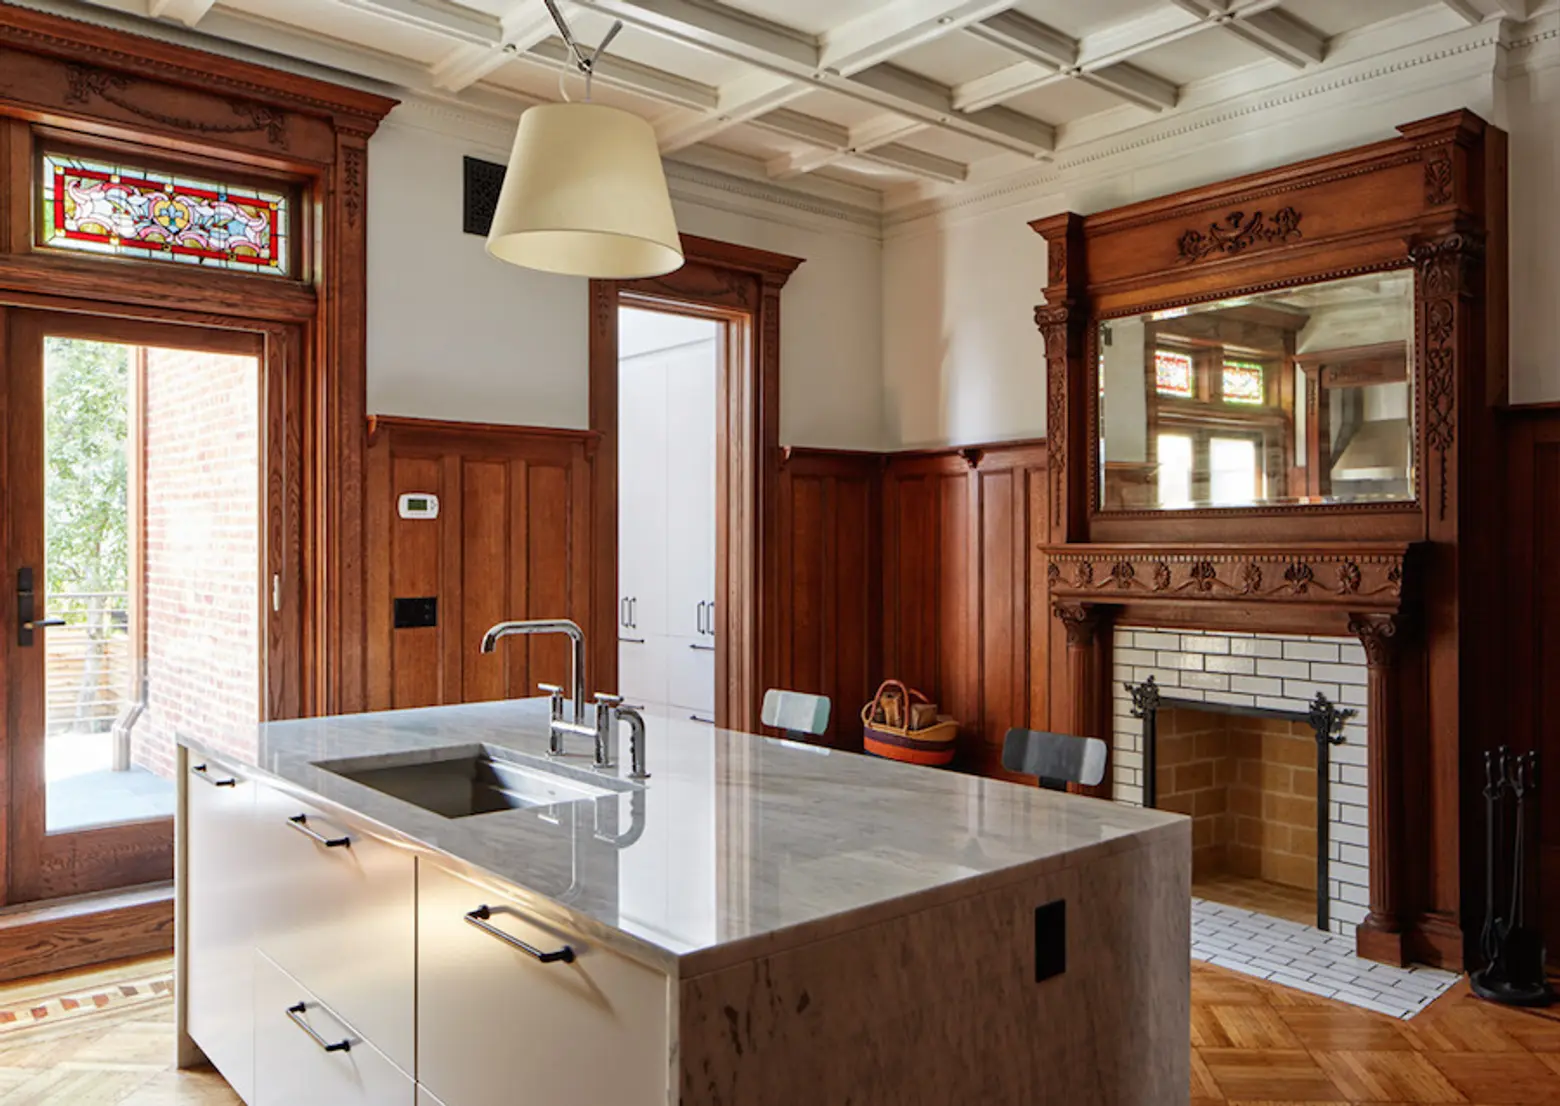 390 Sterling Place, WE Design, Prospect Heights, Townhouse, Brooklyn, Cool Listing, Brooklyn townhouse for sale, Interiors, Renovation,